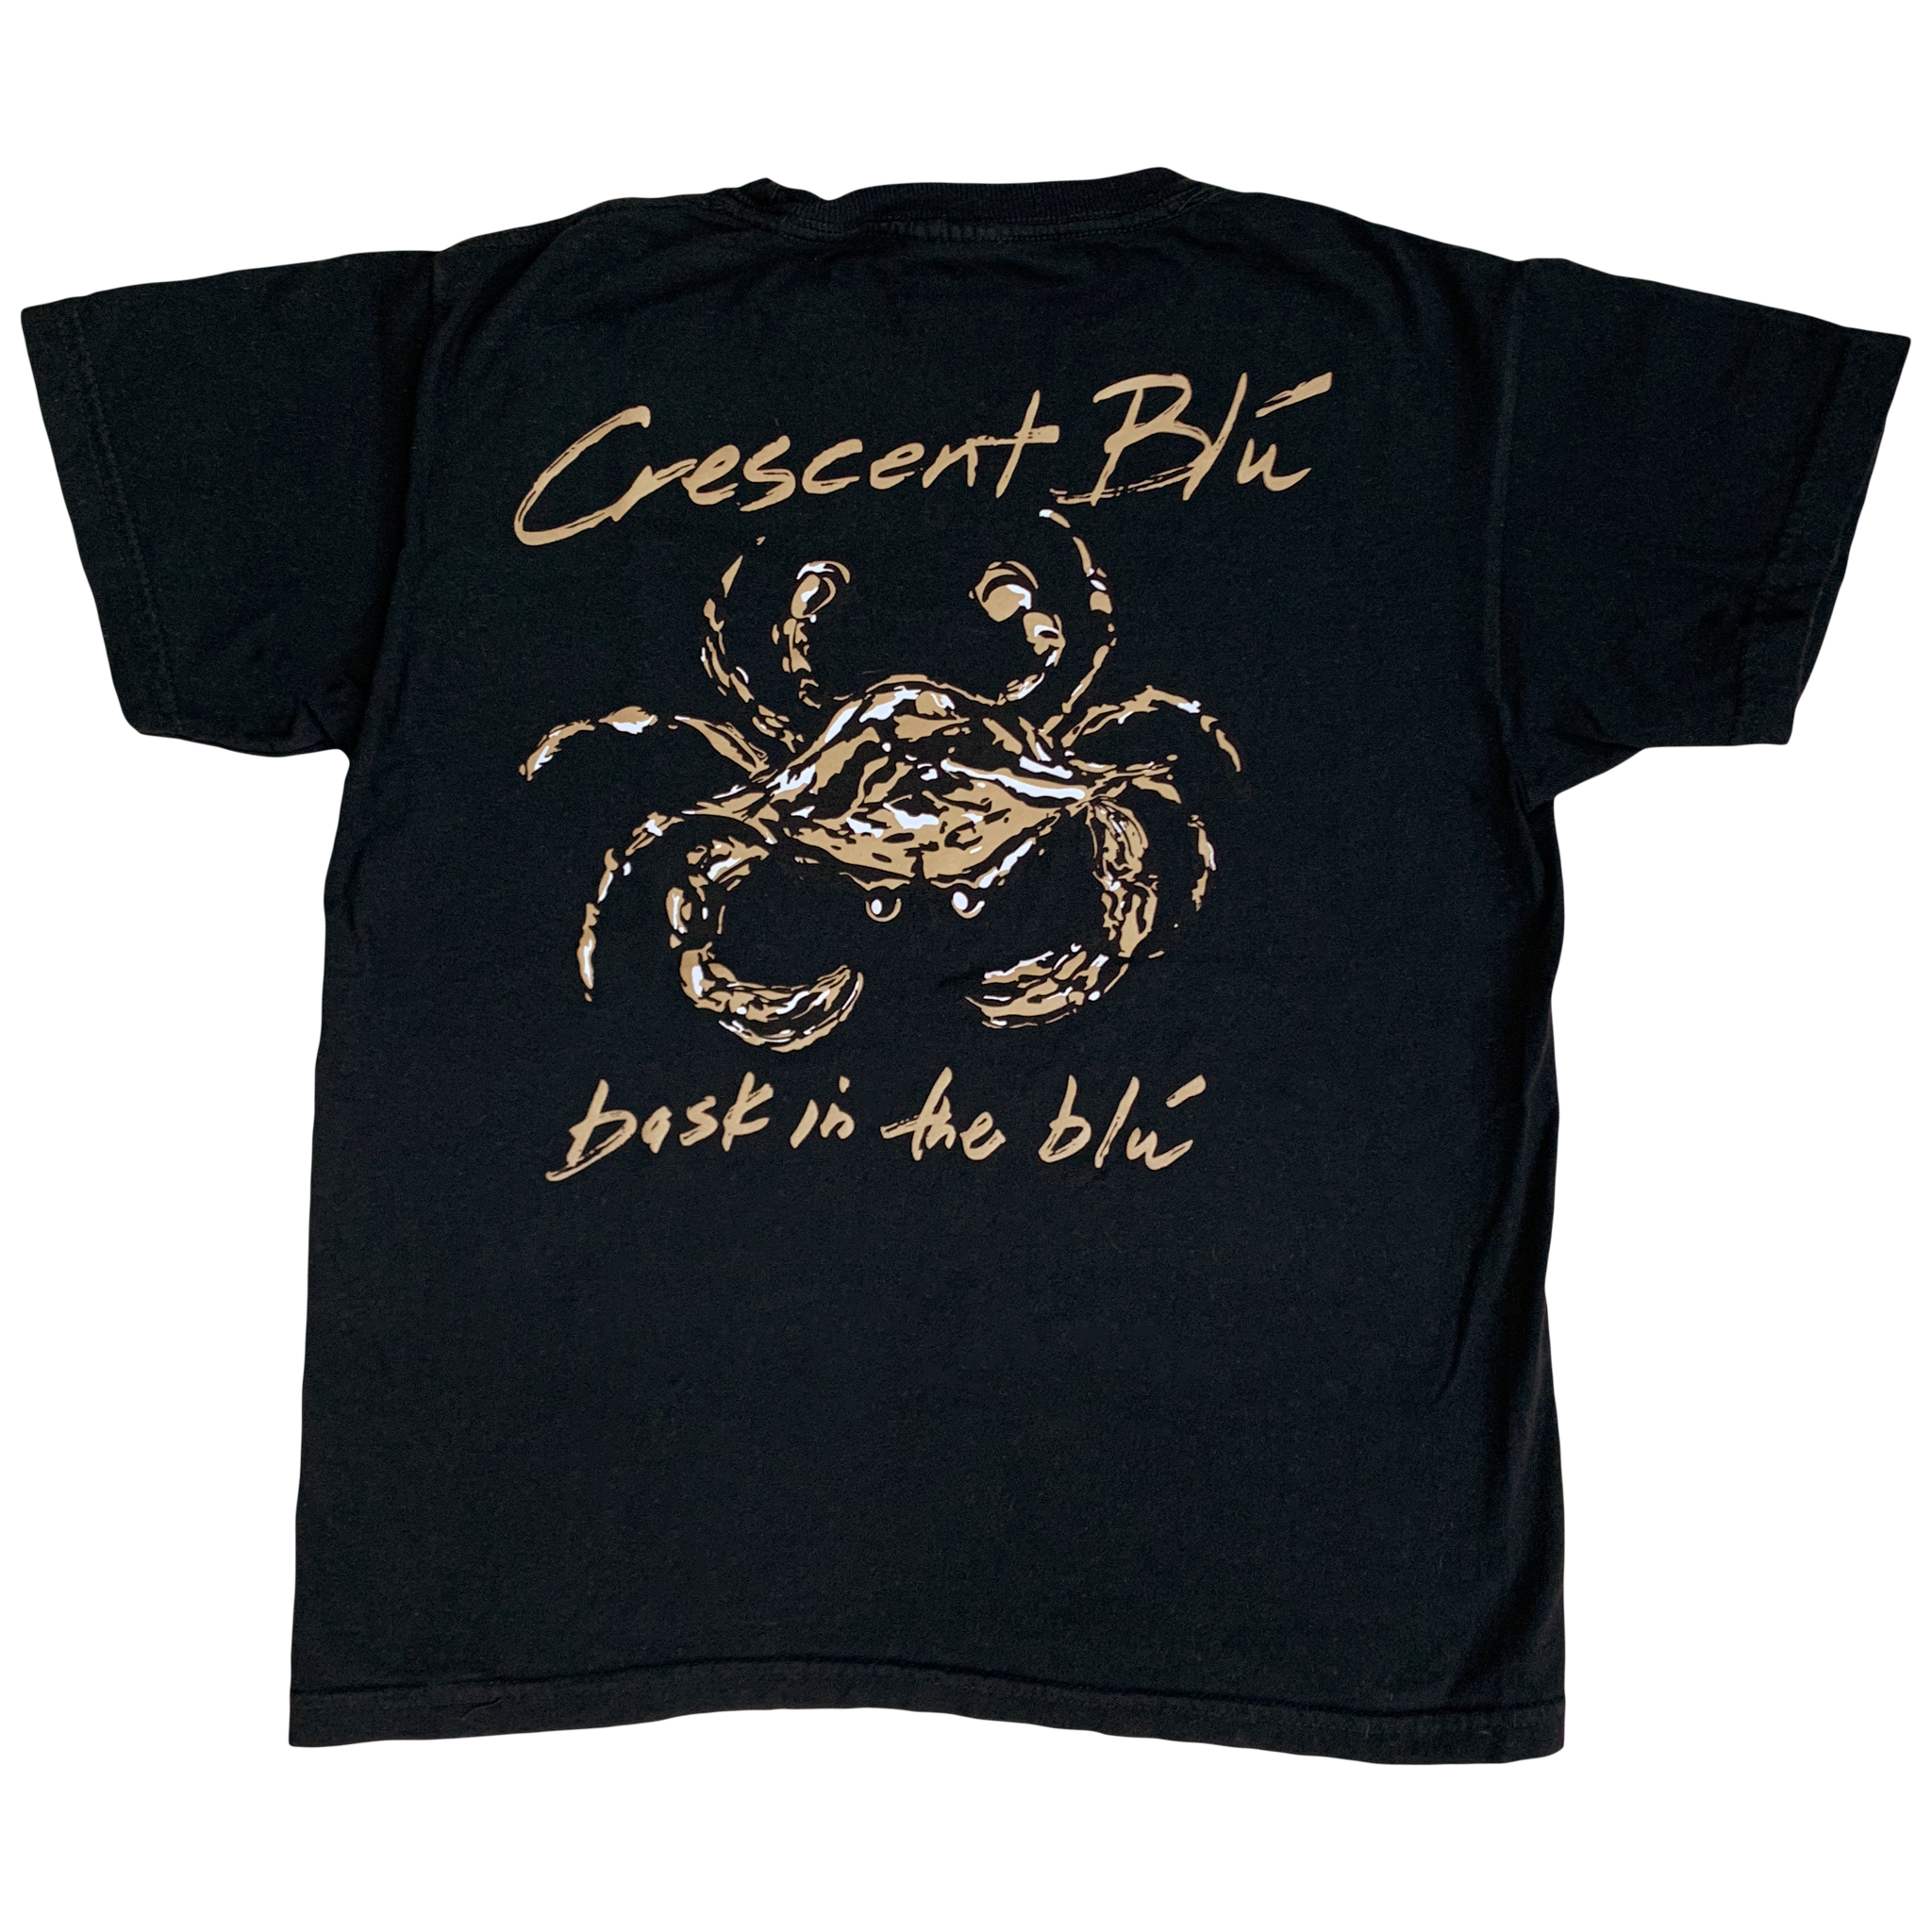 A black, gold, and white crab centered on the back of a black cotton youth short sleeve t-shirt. Written in gold above the crab is Crescent Blu, below the crab is bask in the blu written in gold.